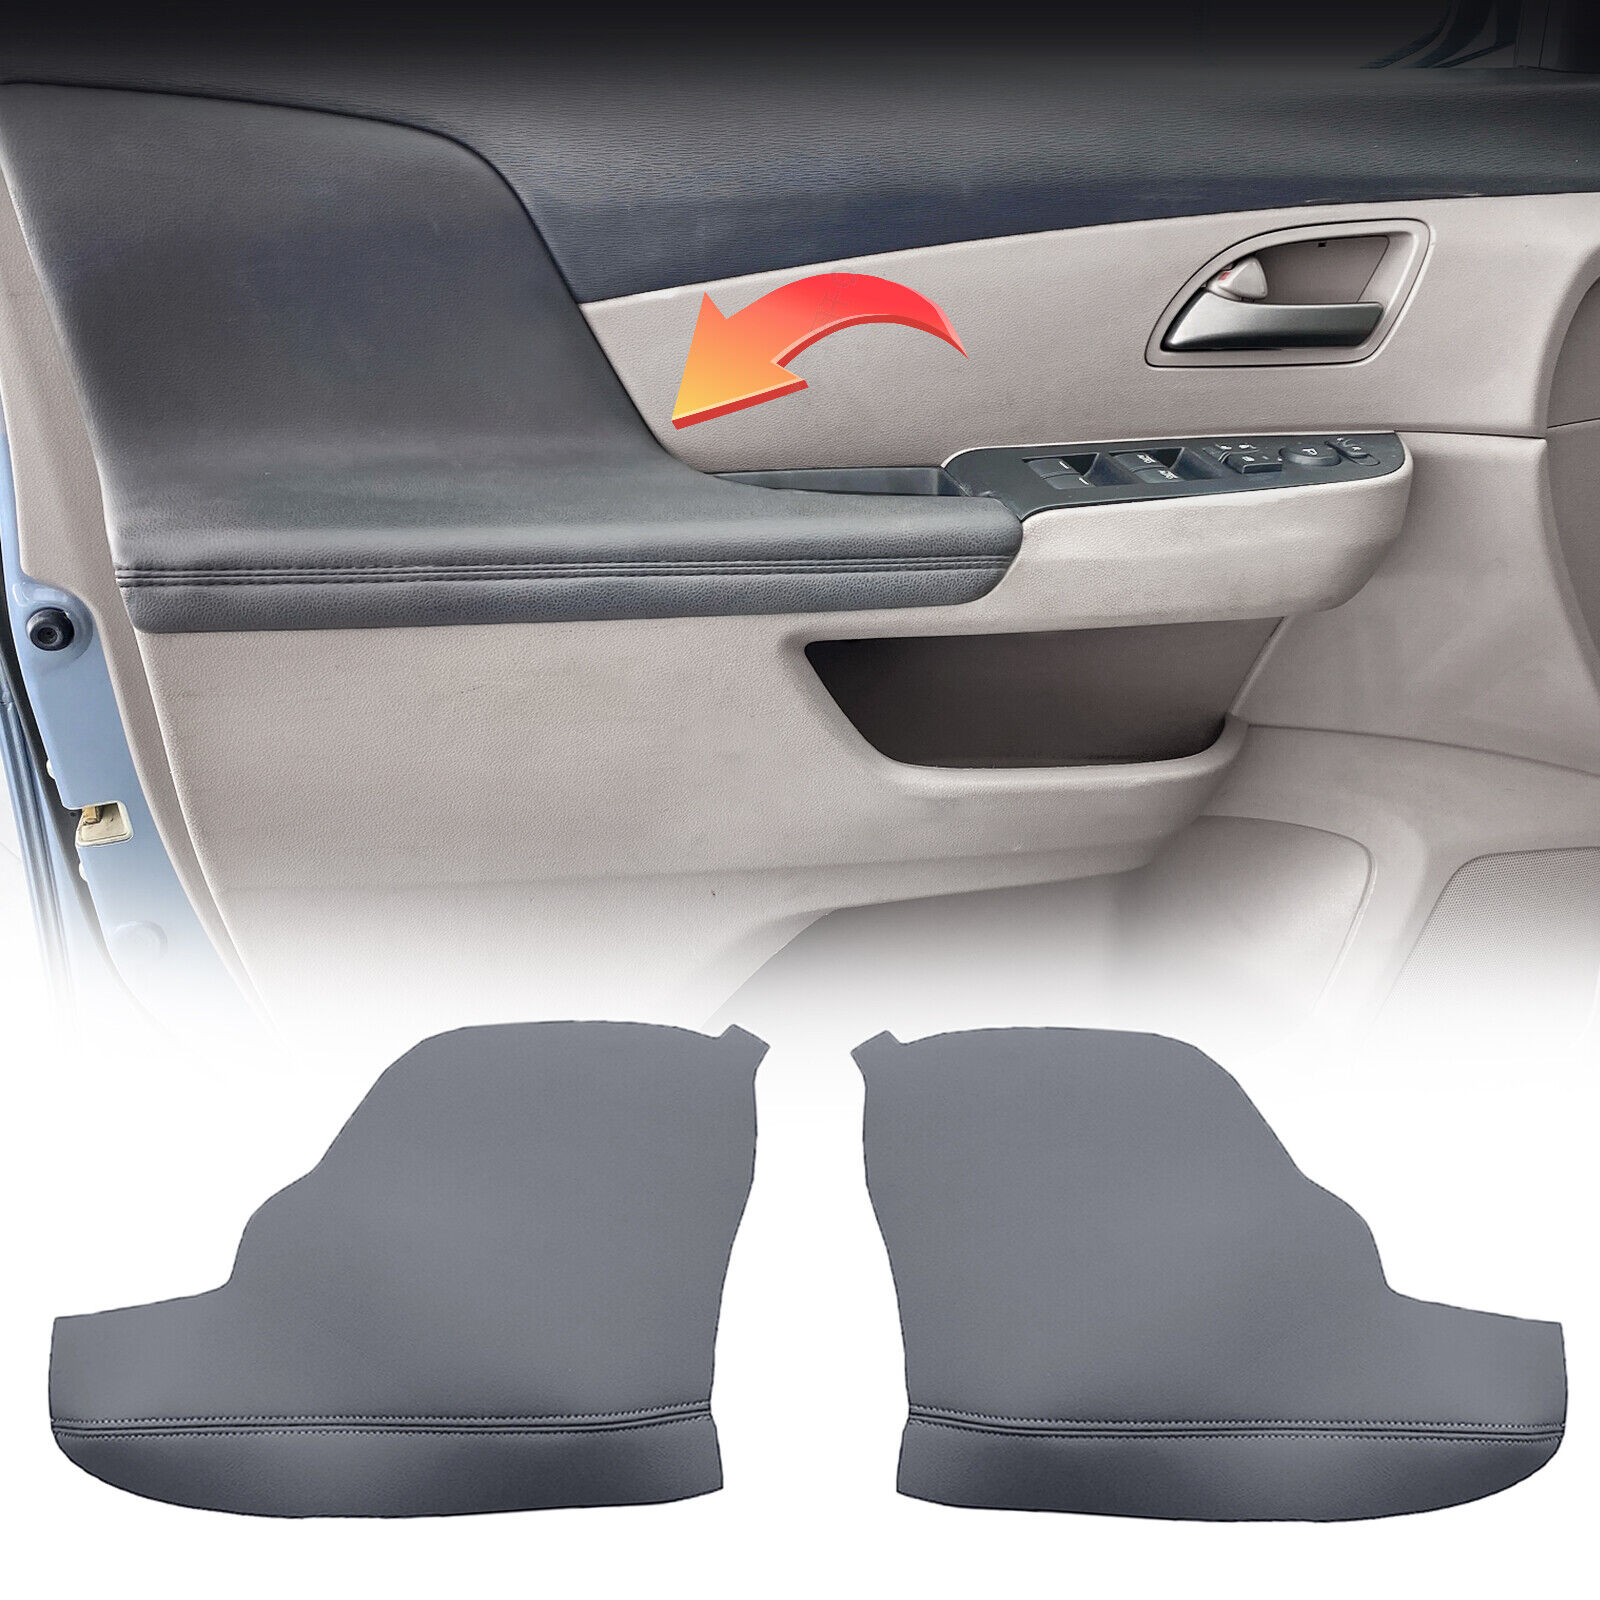 2x Door Armrest Replacement Cover Leather For Honda Odyssey 2011-2017 Dark Gray